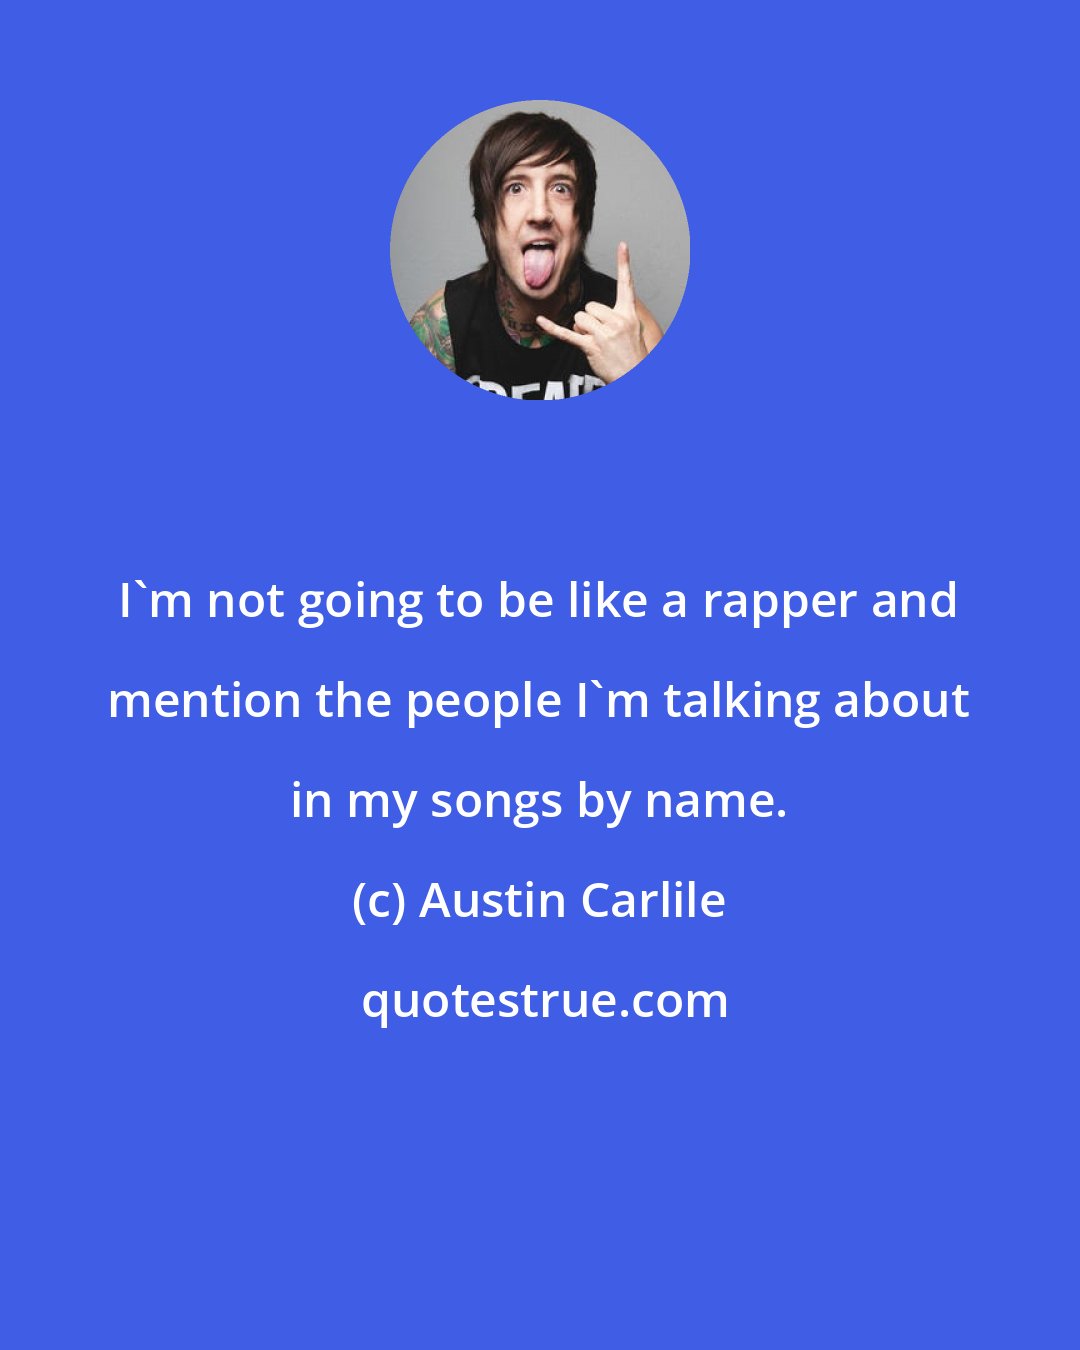 Austin Carlile: I'm not going to be like a rapper and mention the people I'm talking about in my songs by name.